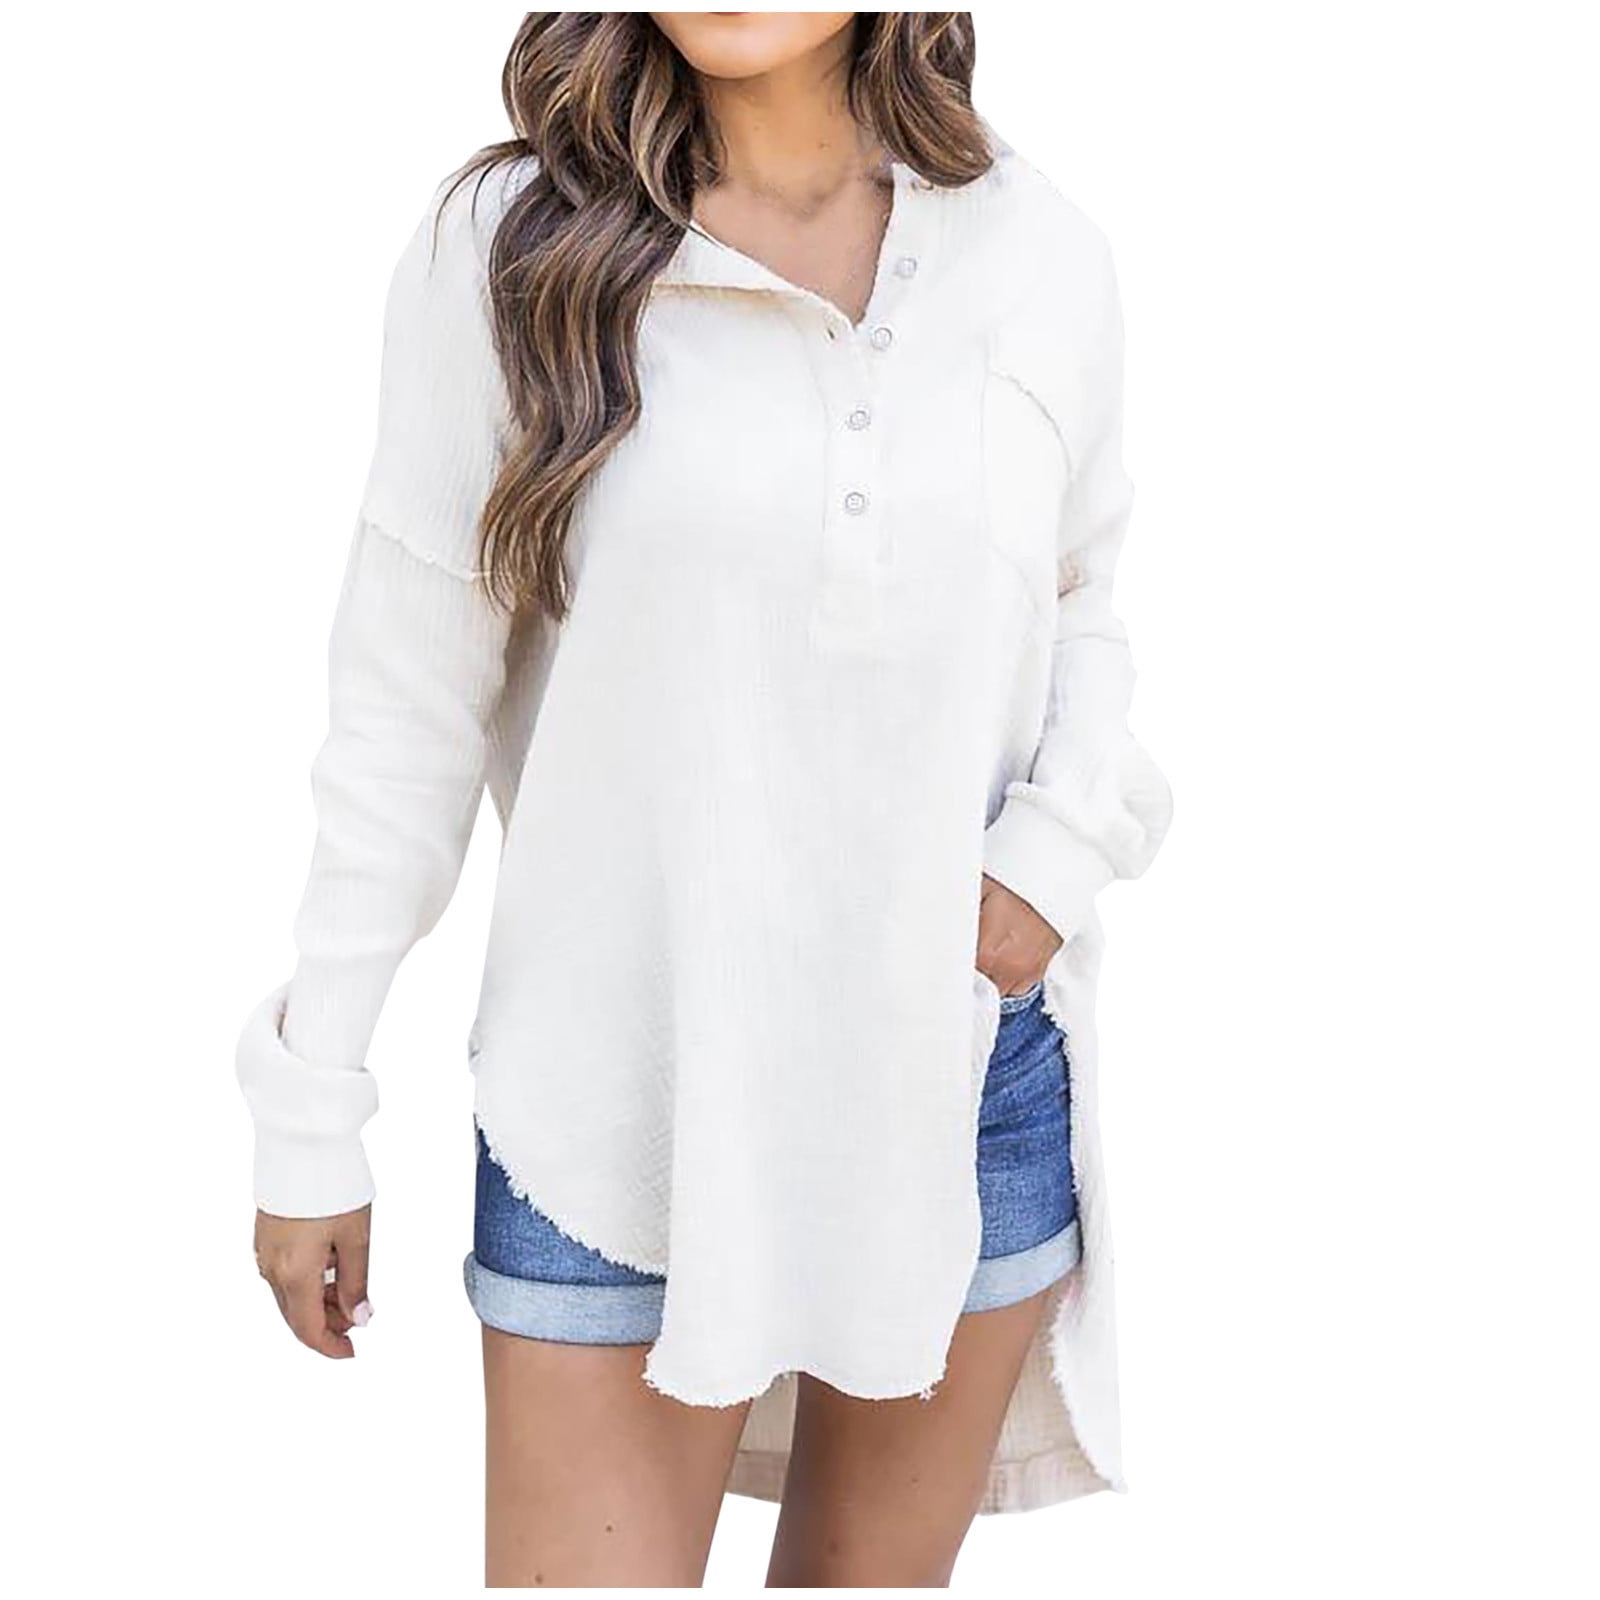 CYMMPU Ladies 1/4 Button up Clothing Long Sleeve Off Shoulder